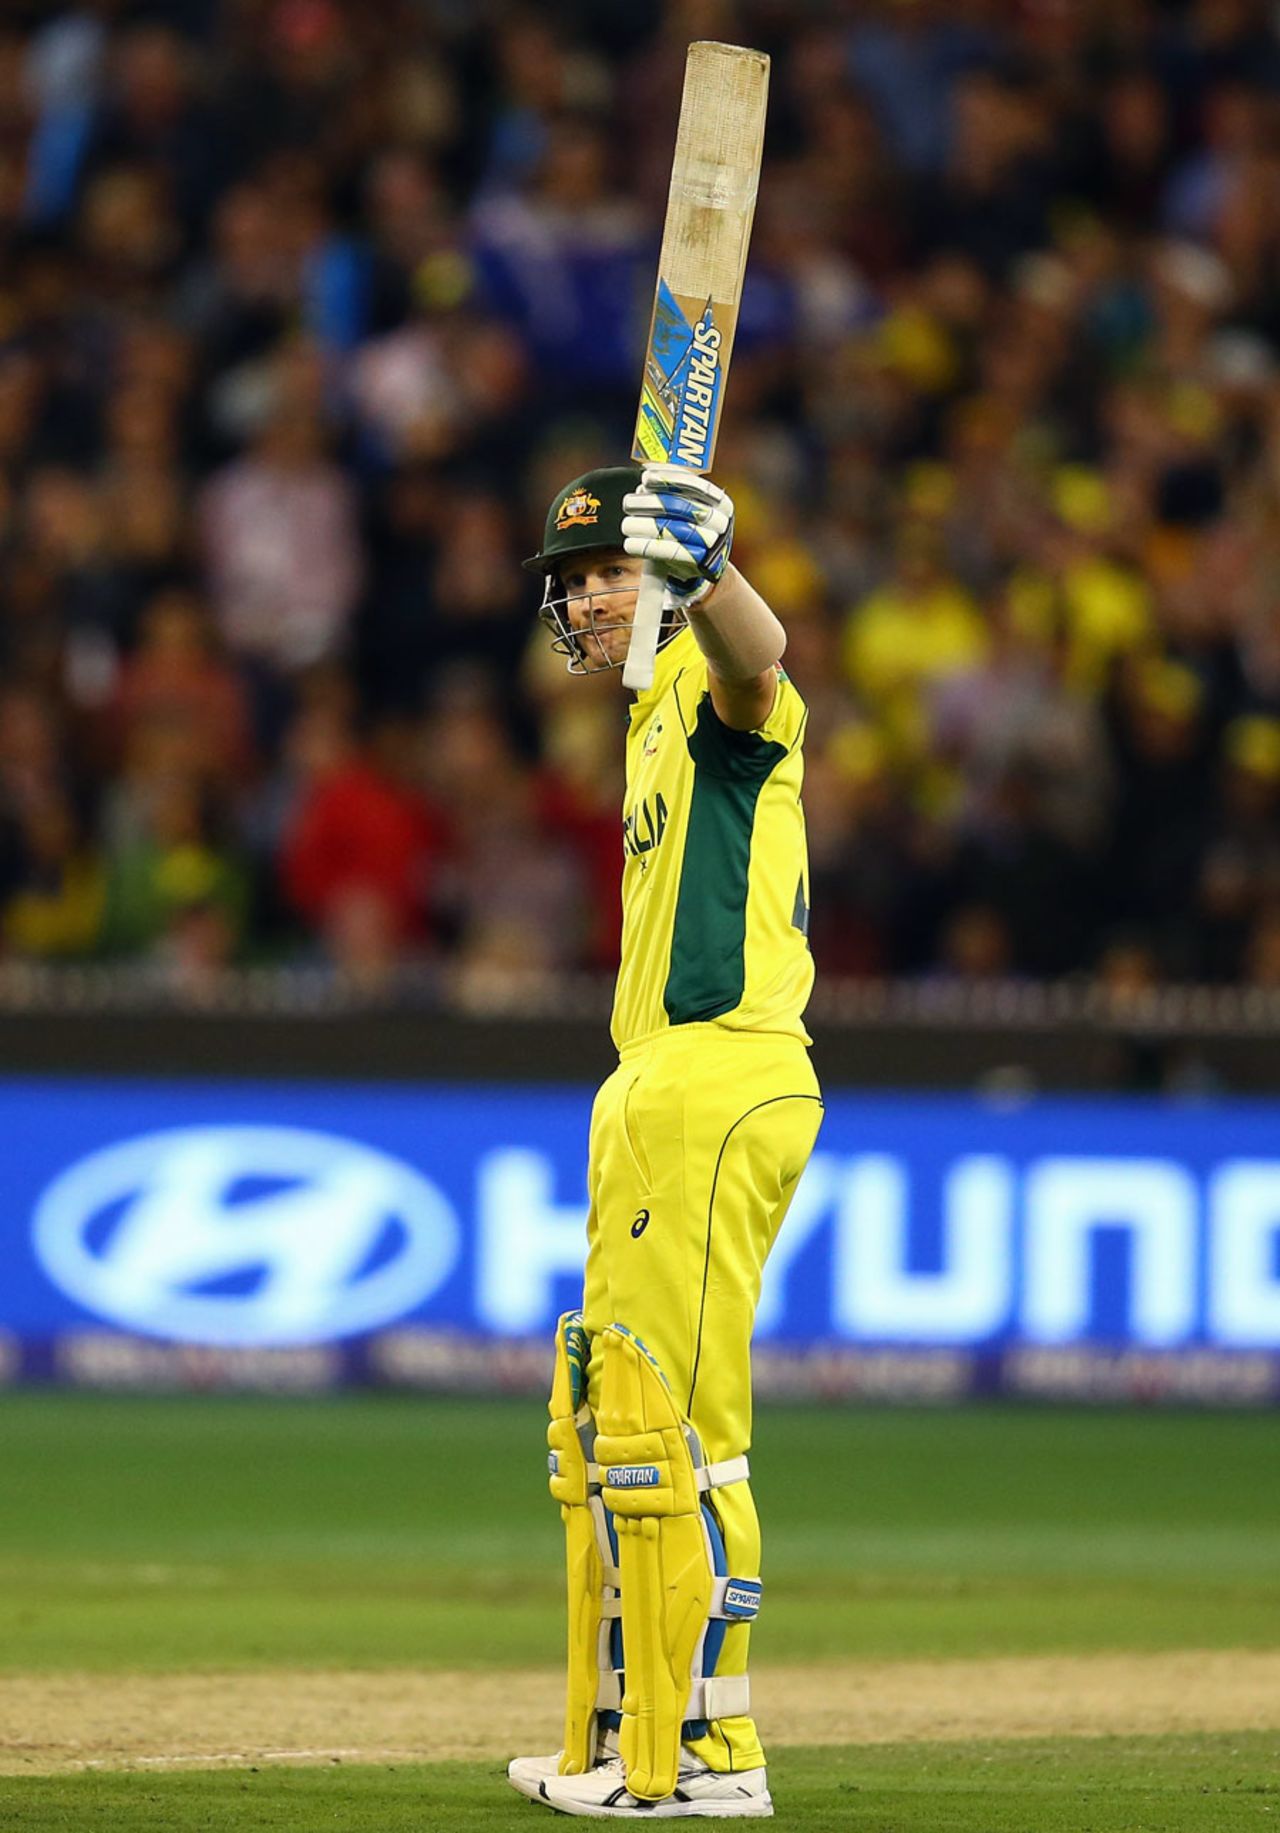 Michael Clarke got to 50 off 56 balls in his last ODI innings, Australia v New Zealand, World Cup 2015, final, Melbourne, March 29, 2015